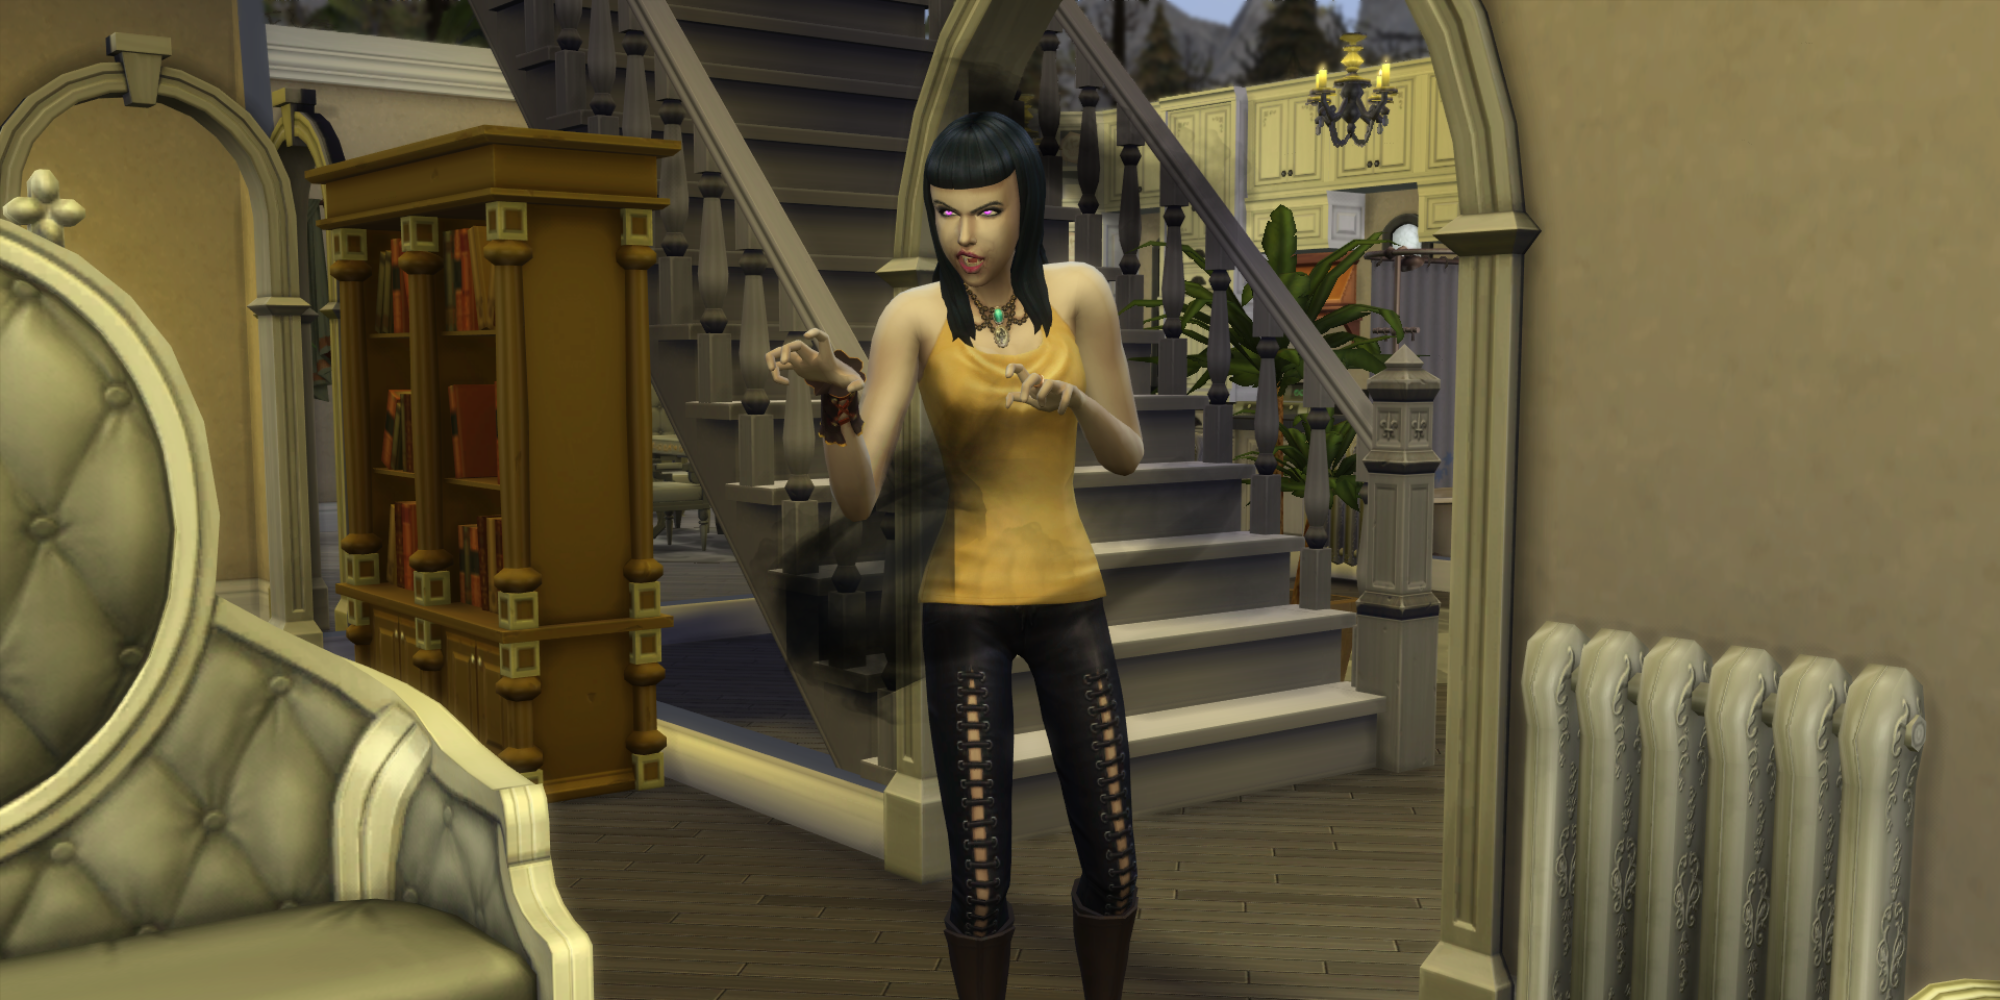 A vampire reveals their true form in The Sims 4